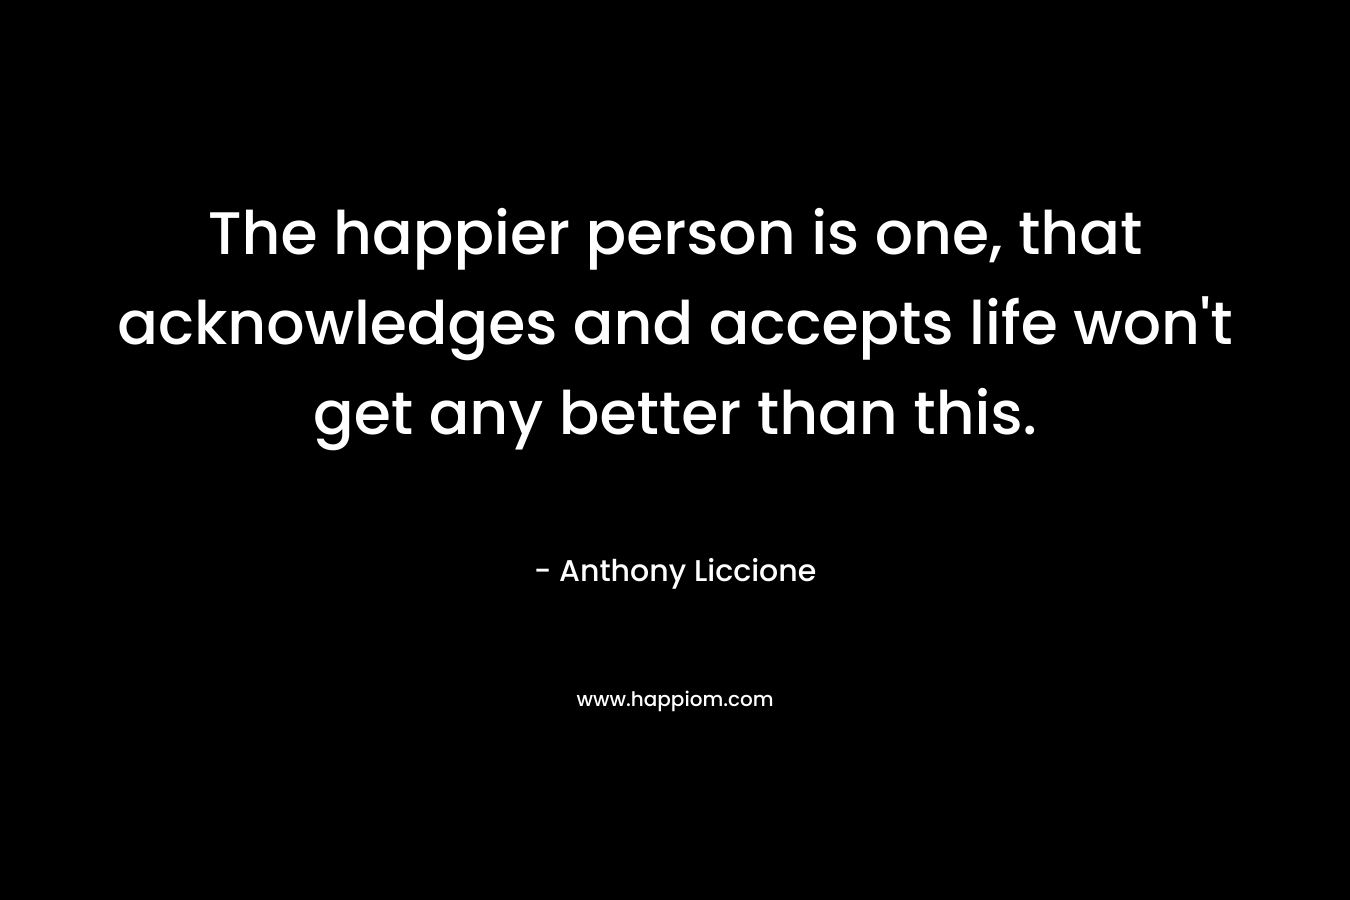 The happier person is one, that acknowledges and accepts life won’t get any better than this. – Anthony Liccione